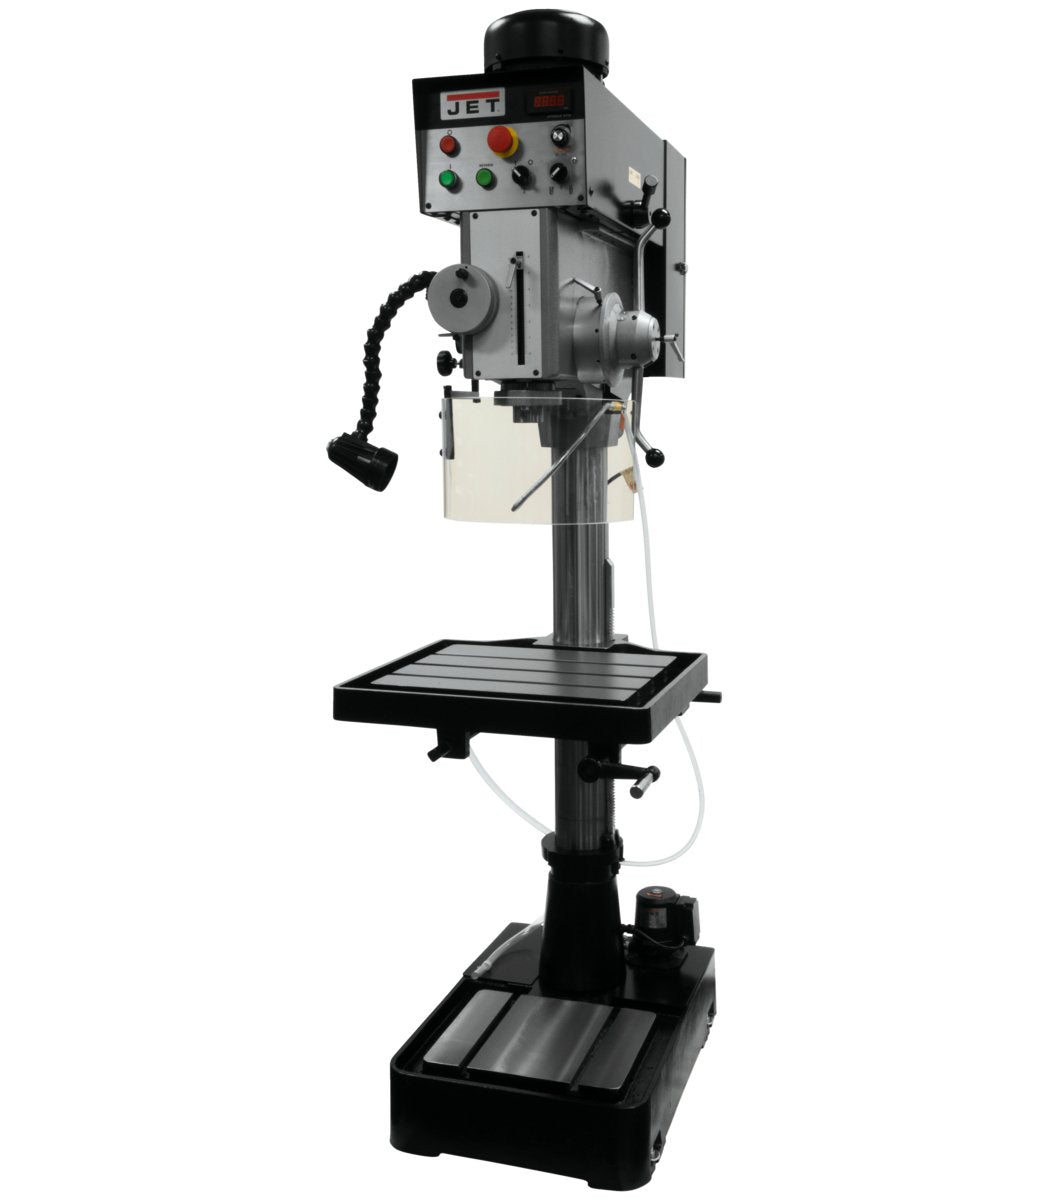 20" EVS Geared Head Drill Press With Tapping & Power Downfeed - 230V - Diamond Tool Store